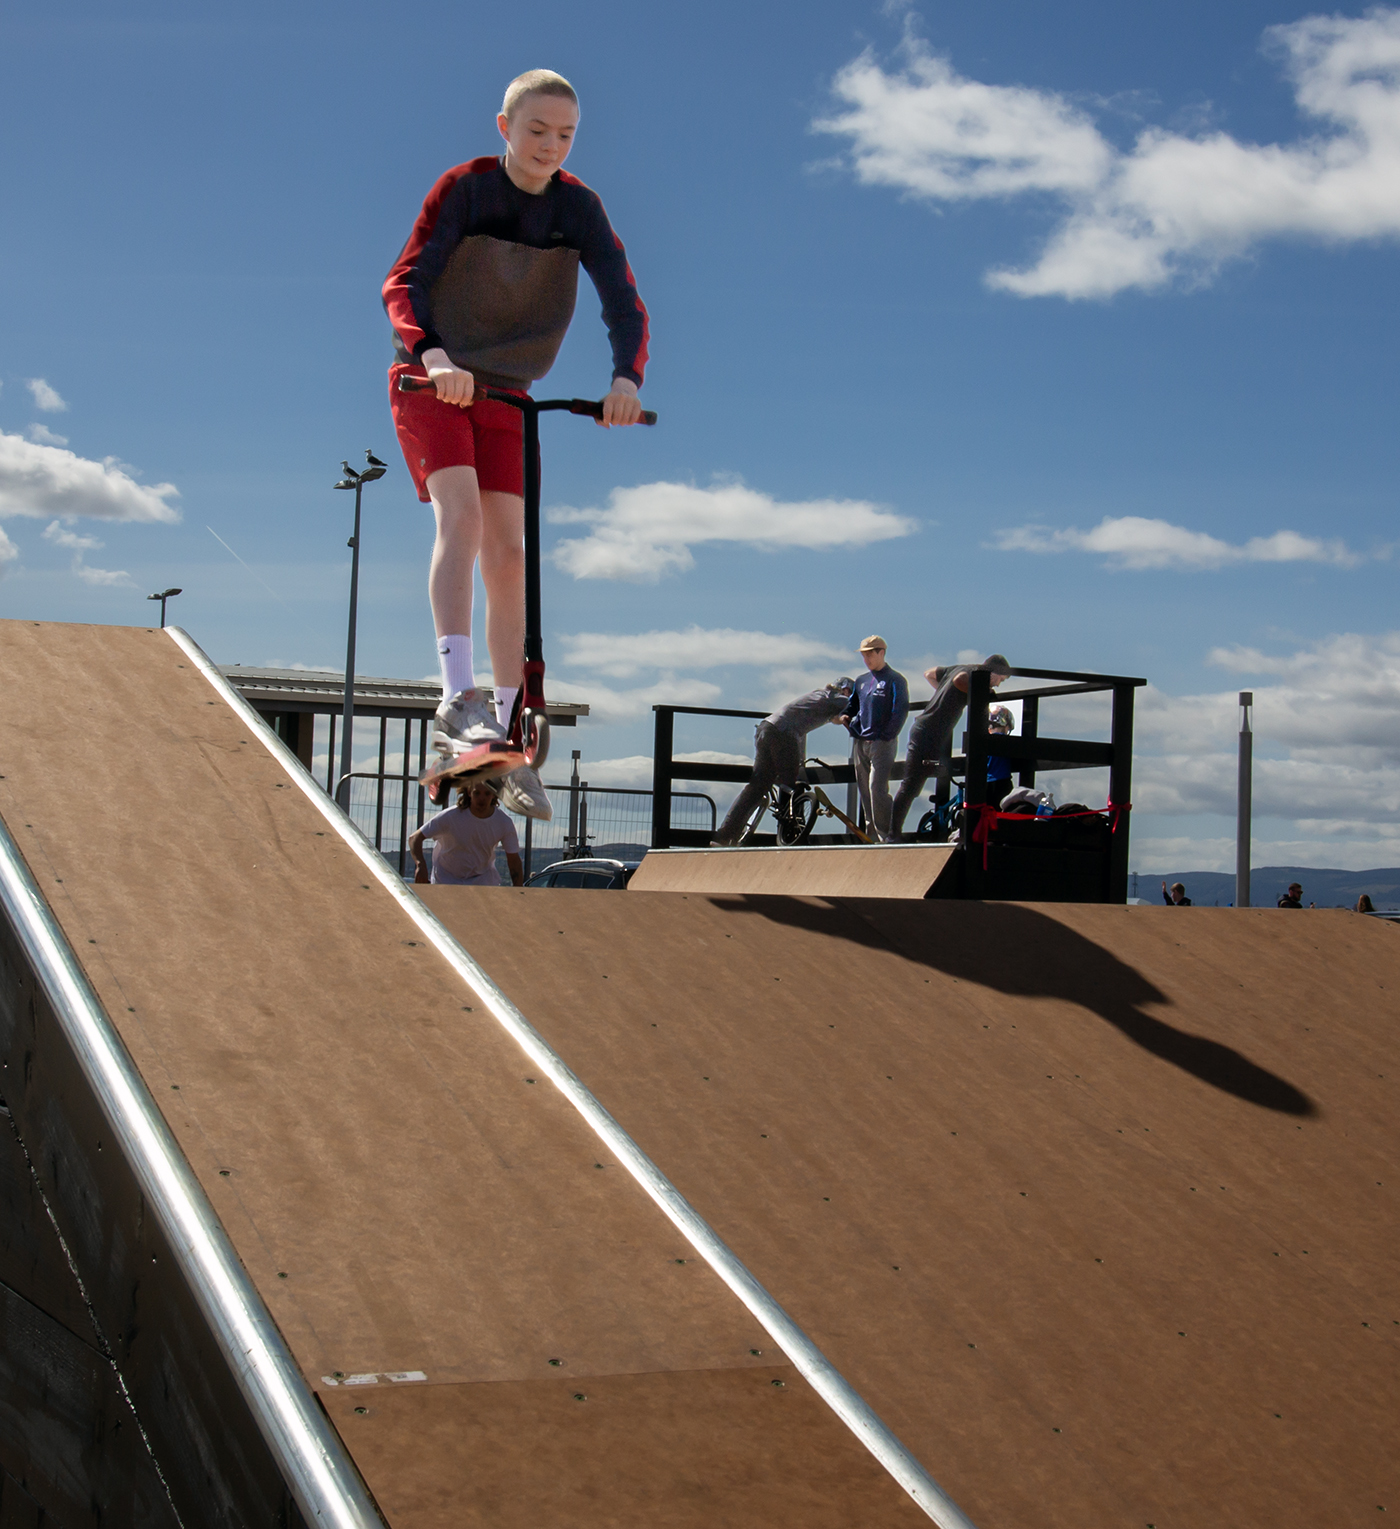 Helensburgh Skate Park enjoyed its first day on Saturday, April 20 as young people tried out the new ramps